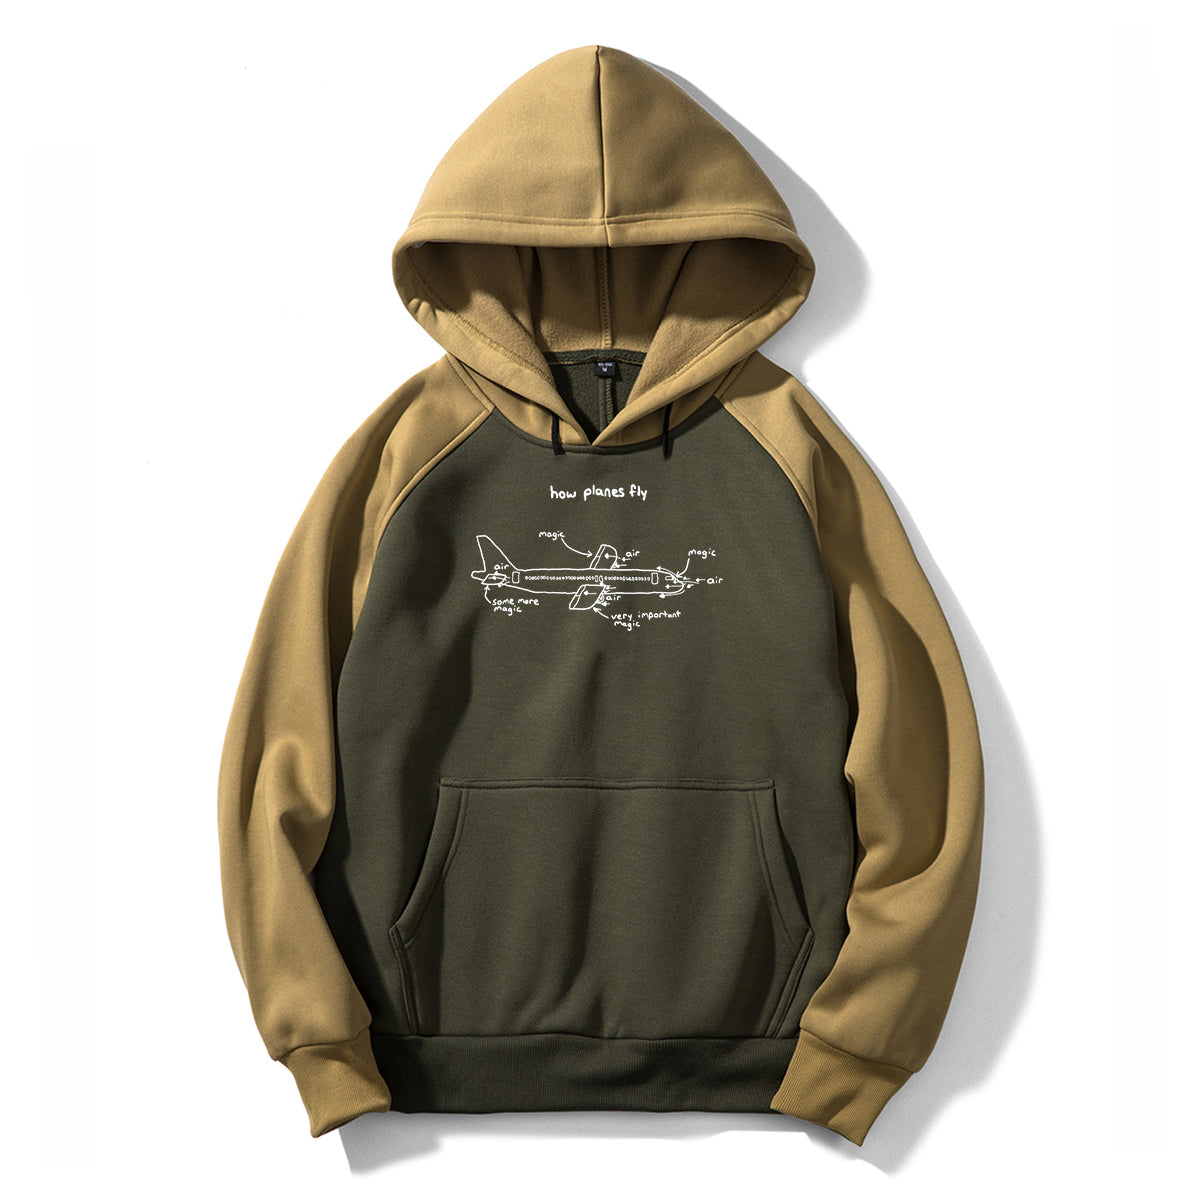 How Planes Fly Designed Colourful Hoodies